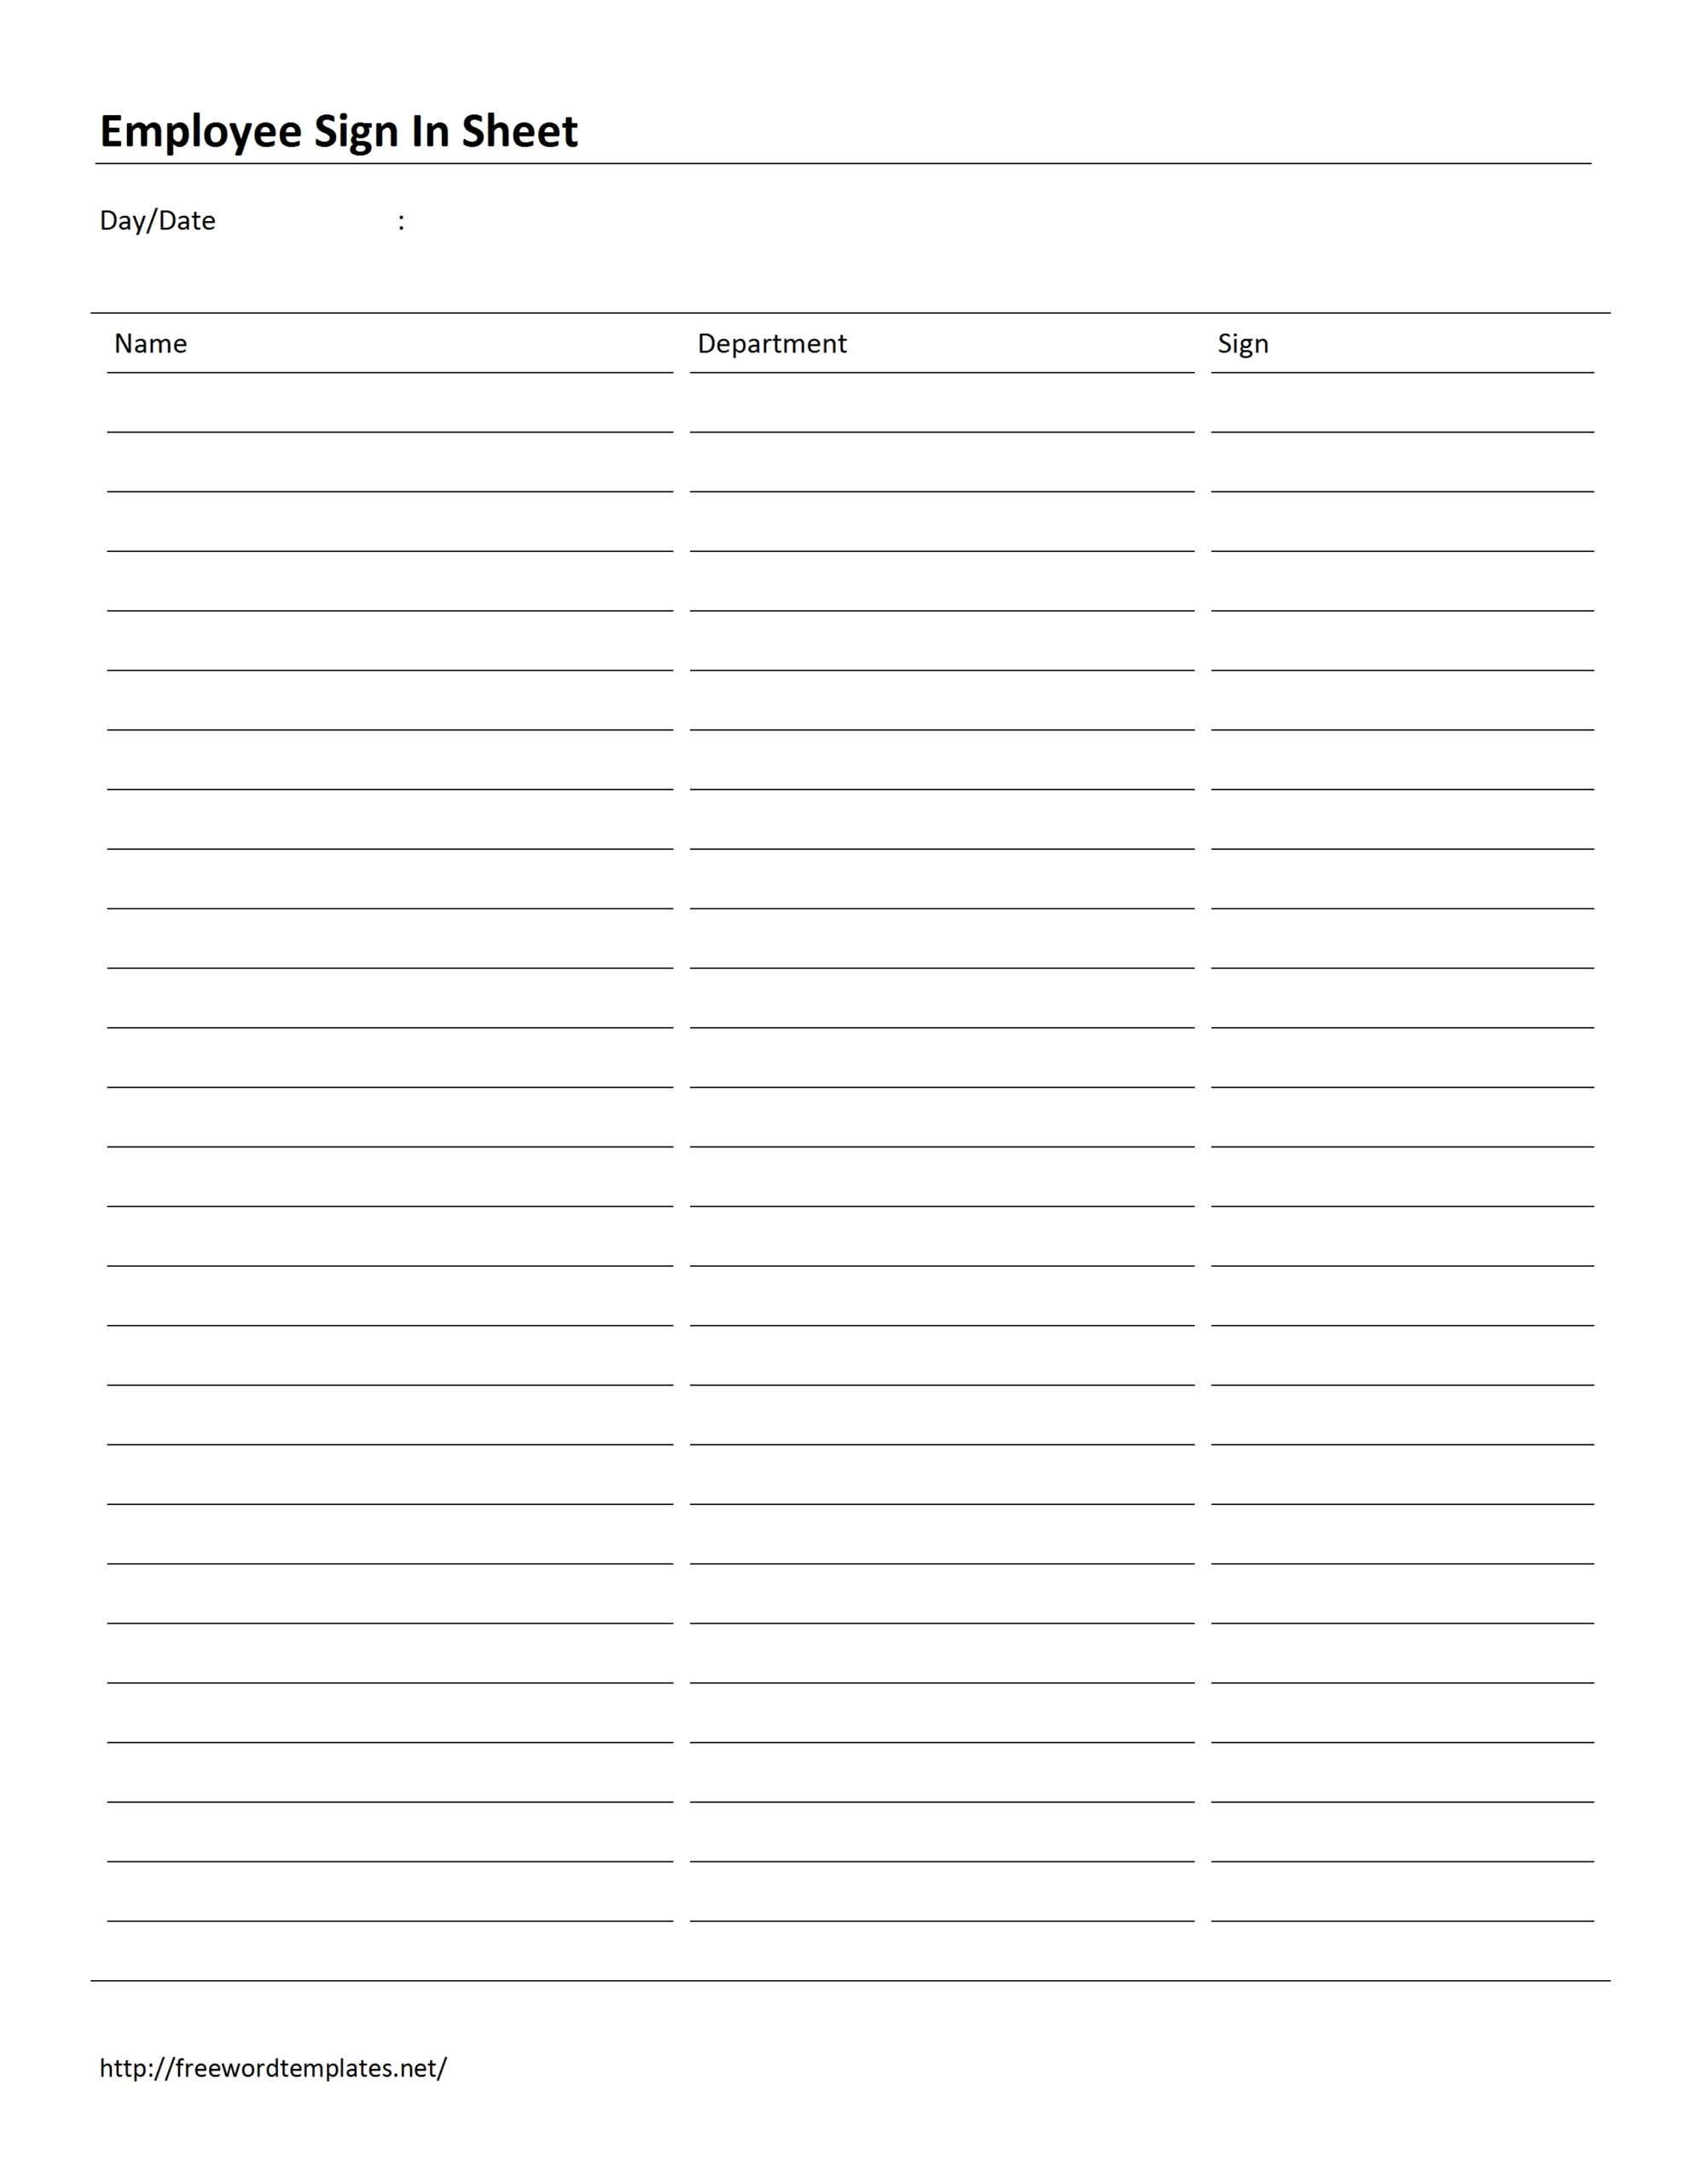 Employee Attendance Sign In Sheet Template With Regard To 3 Column Word Template